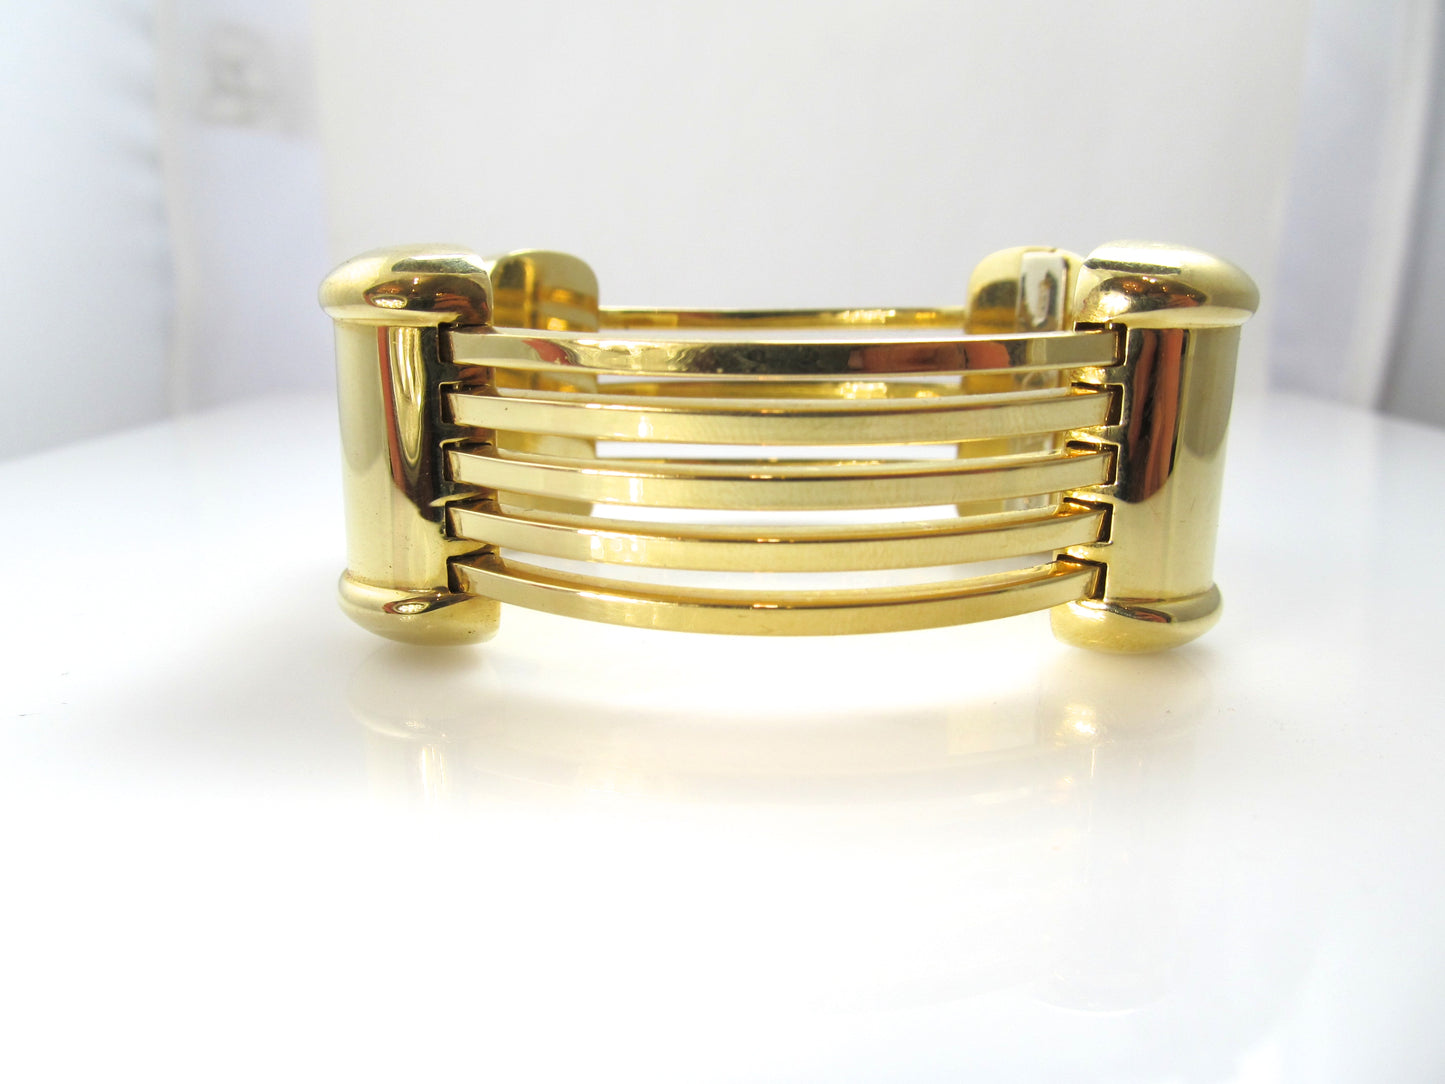 Kria 18k yellow gold bangle bracelet, Victorious cape May